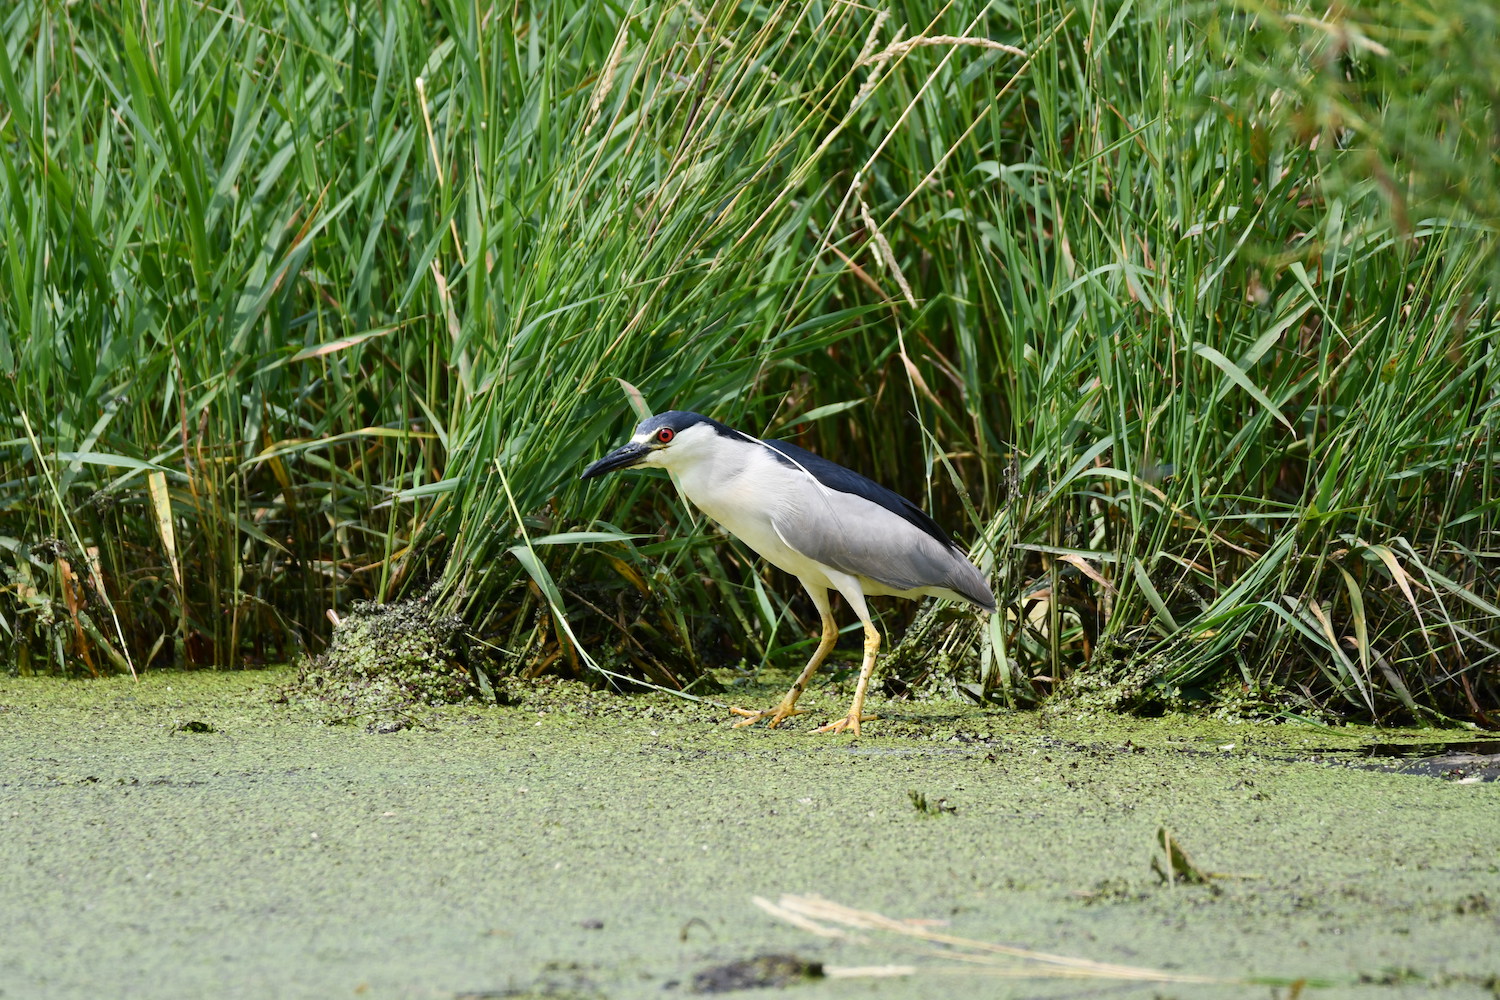 A black-crowned night heron at the water's edge.